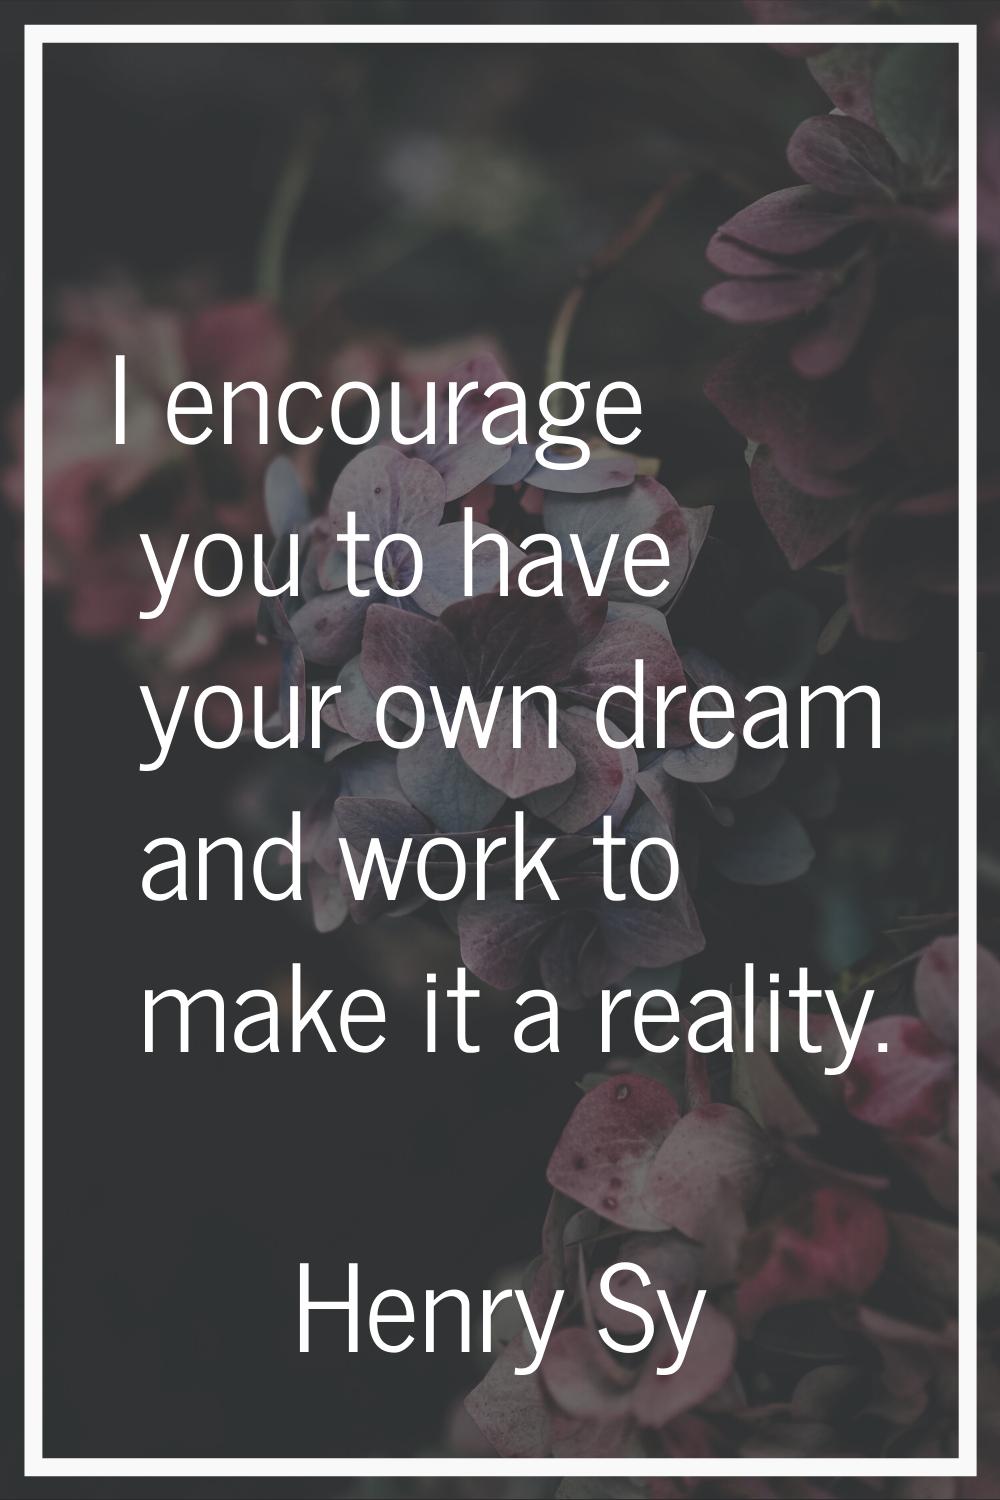 I encourage you to have your own dream and work to make it a reality.